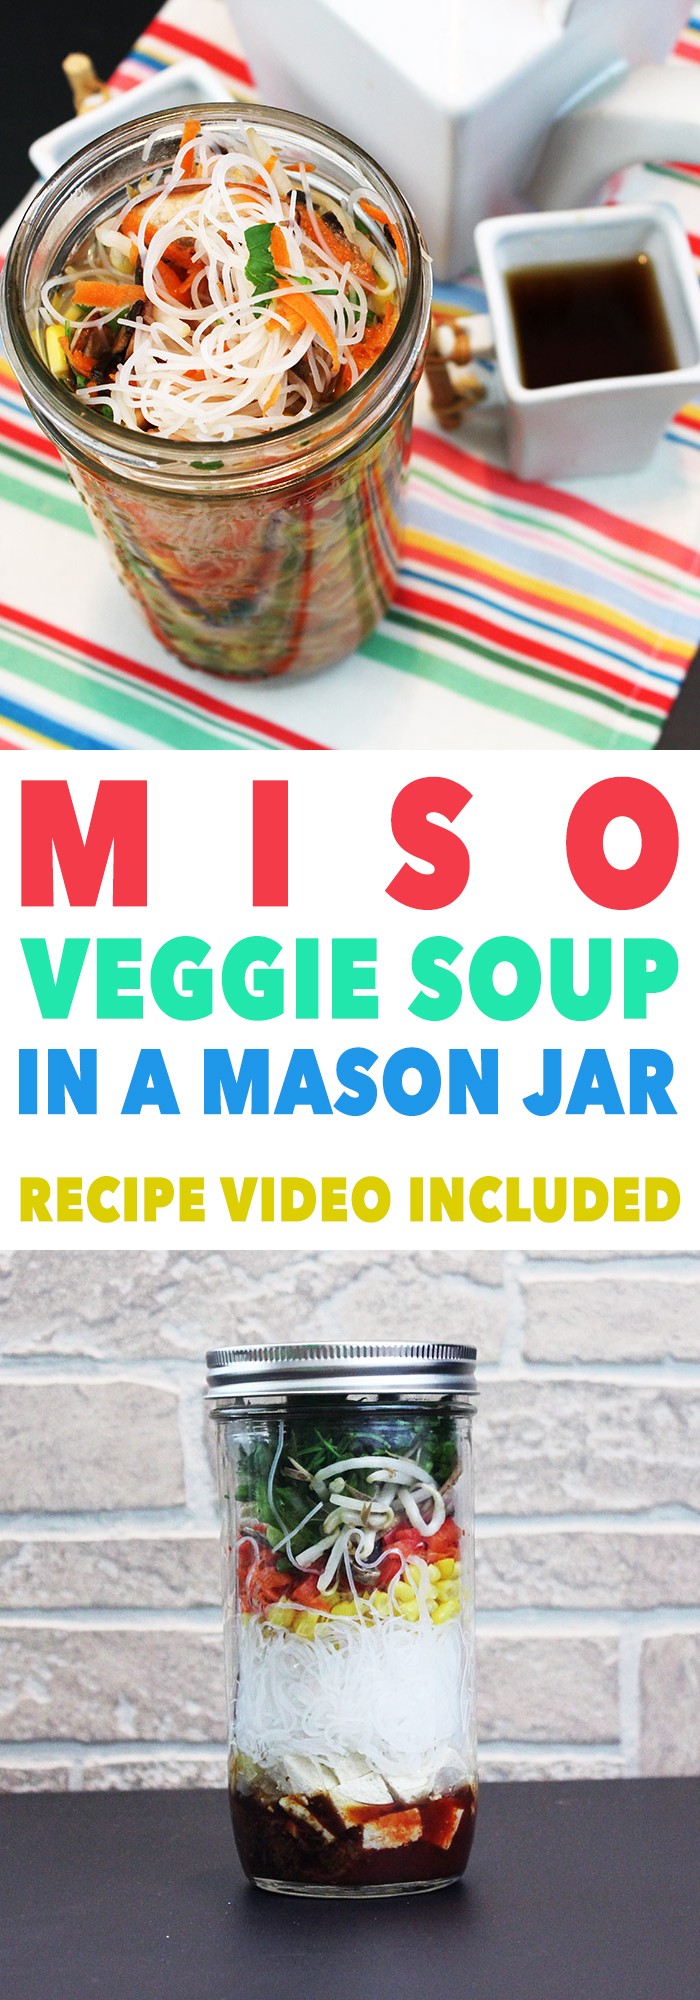 This miso veggie soup recipe is easily made in one mason jar. 